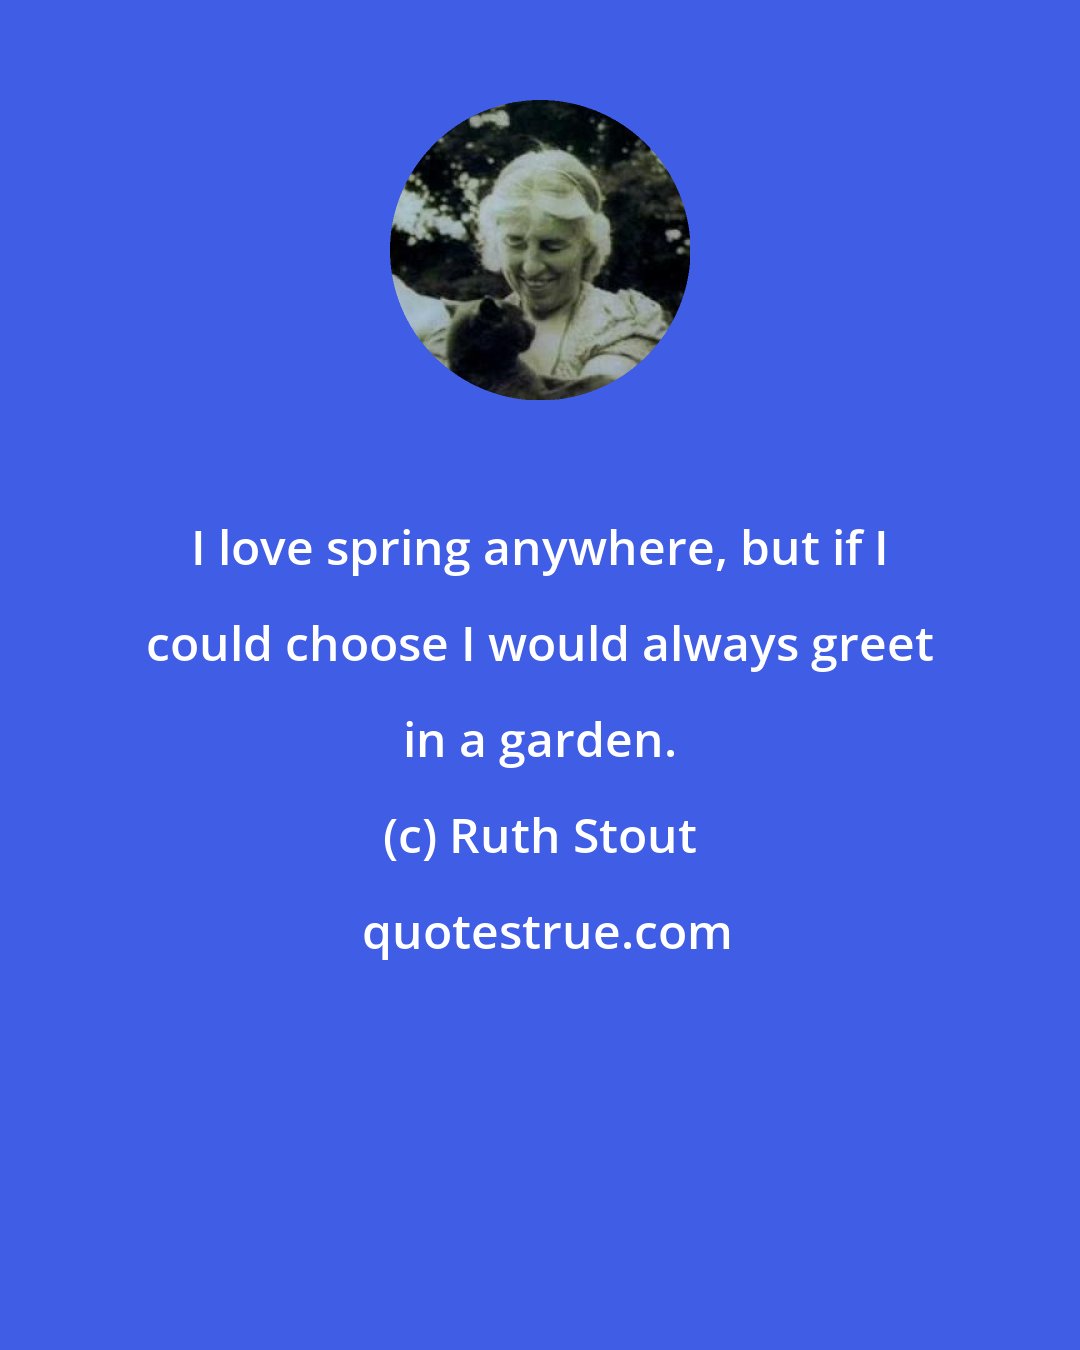 Ruth Stout: I love spring anywhere, but if I could choose I would always greet in a garden.